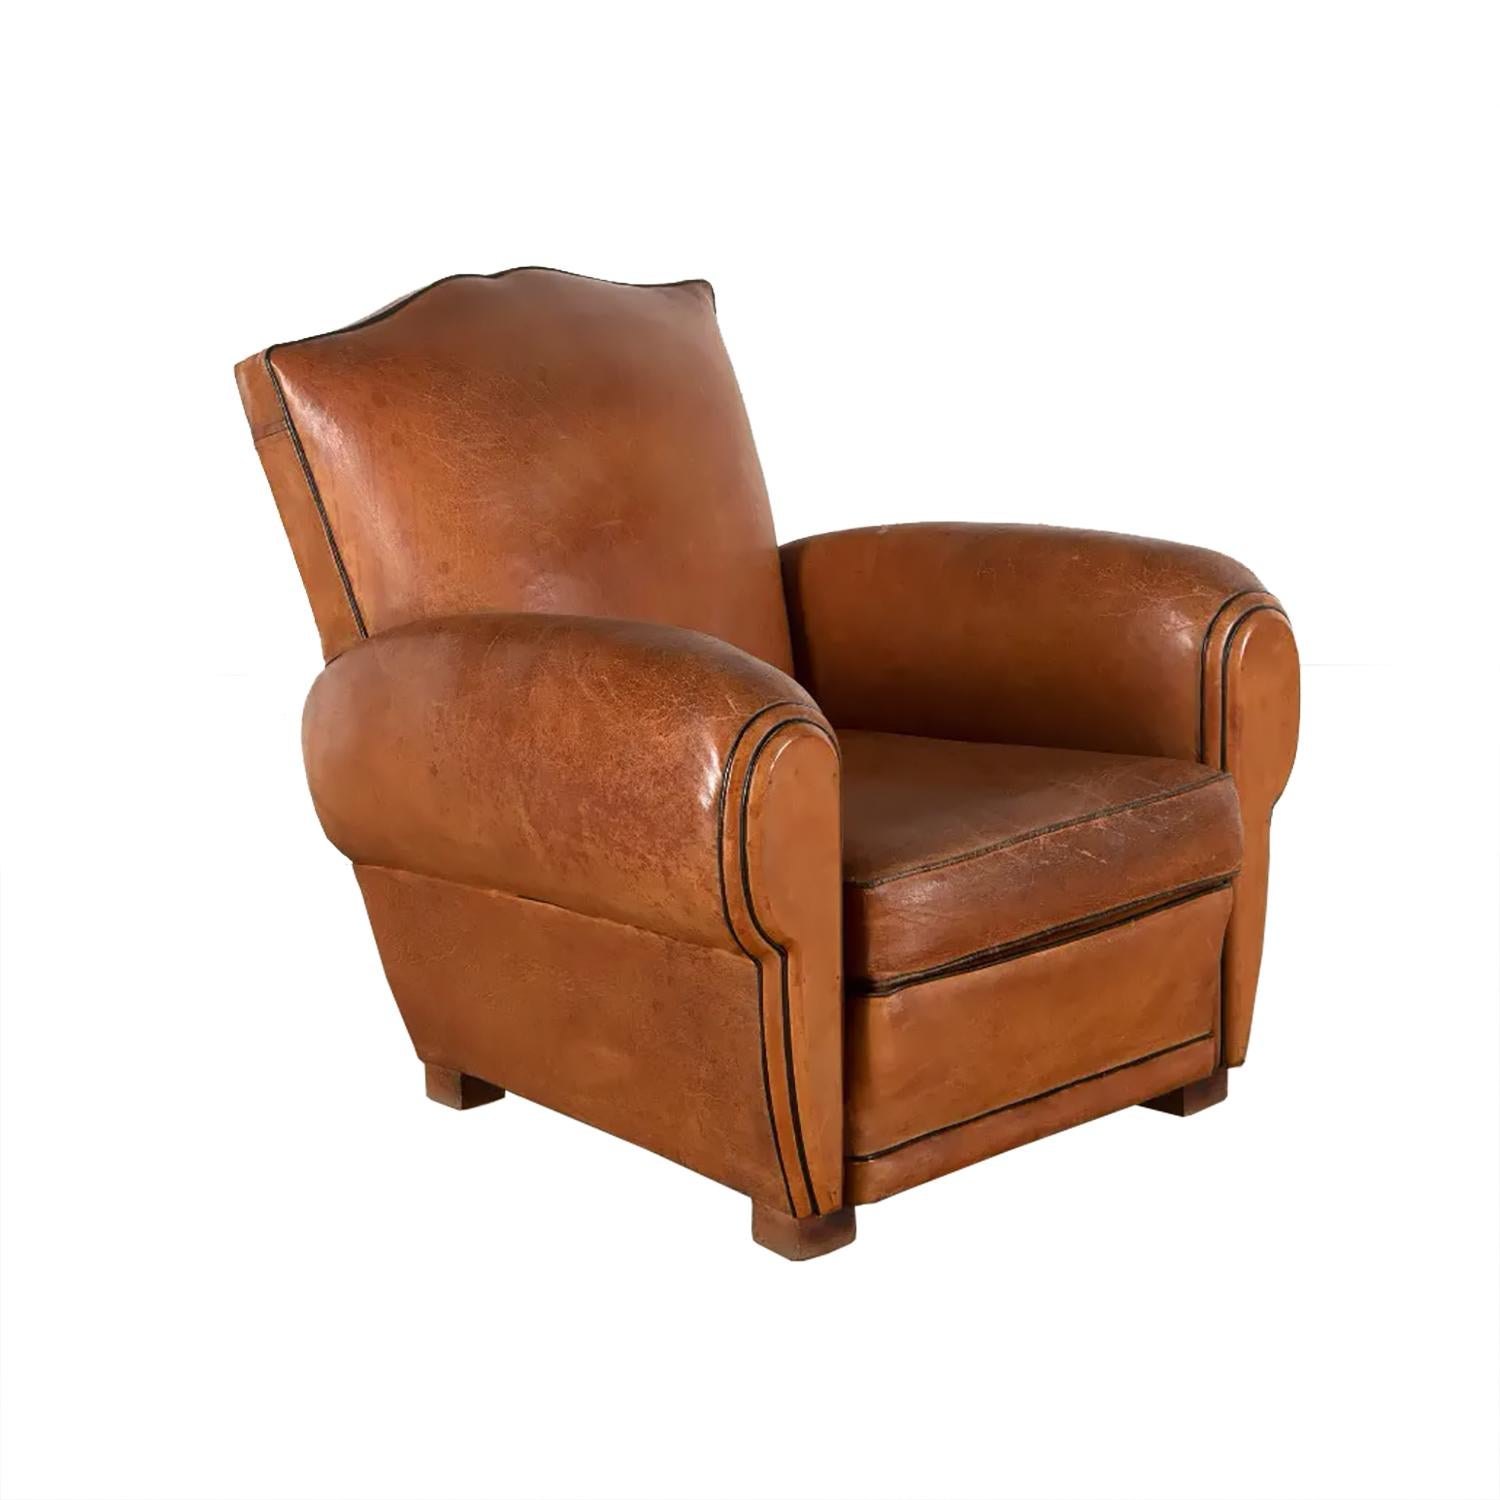 Born in 1929, the often called 'Club Armchair' was inspired by the Art Deco movement and evolved from England and France. Furniture designers seized the opportunity to provide their clients with luxury and comfort in line with new tastes.
The name